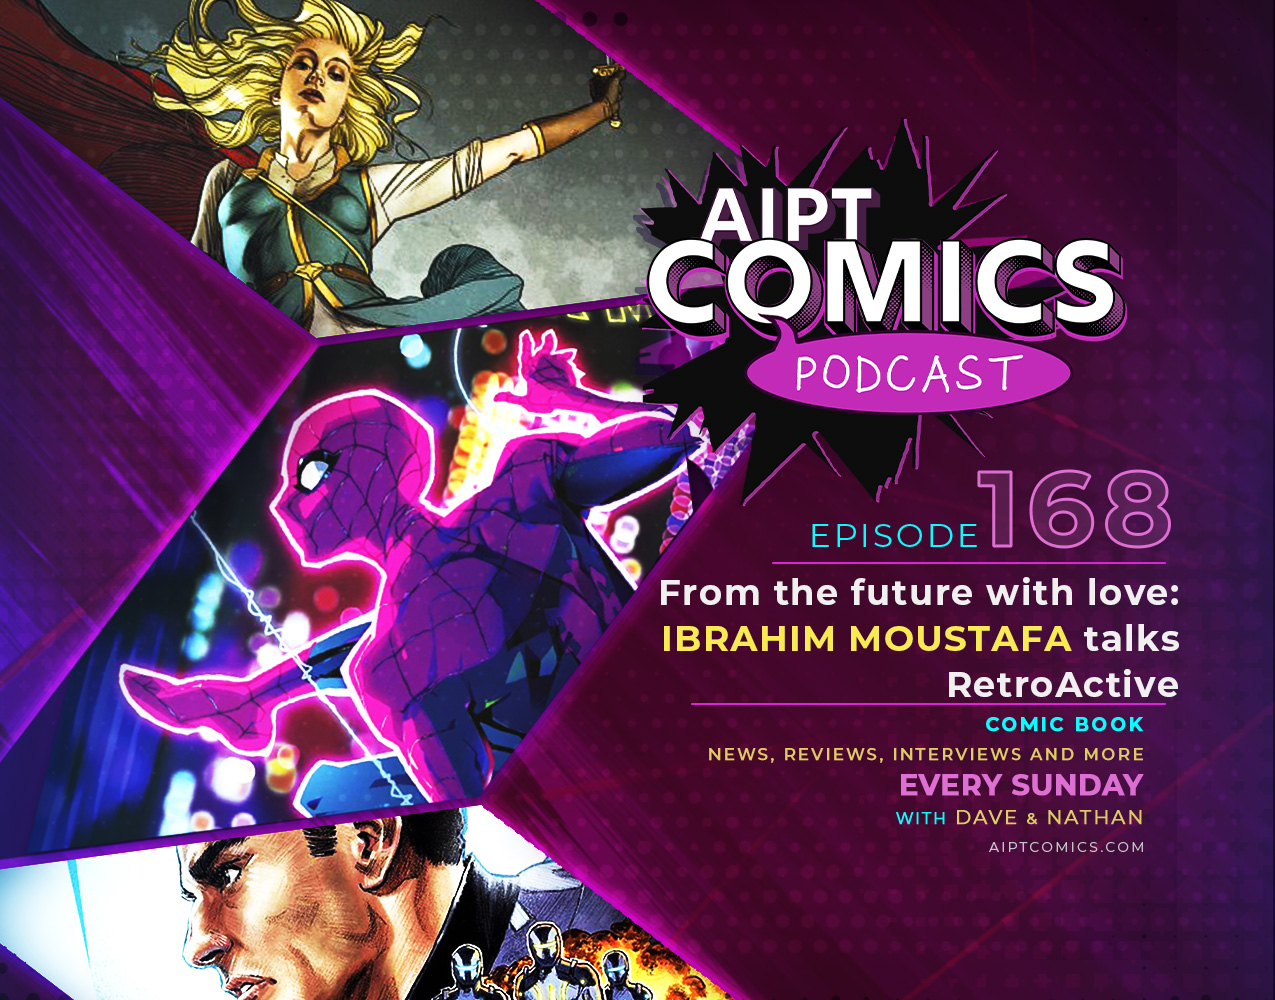 AIPT Comics podcast episode 168: From the Future with Love: Ibrahim Moustafa talks 'RetroActive'